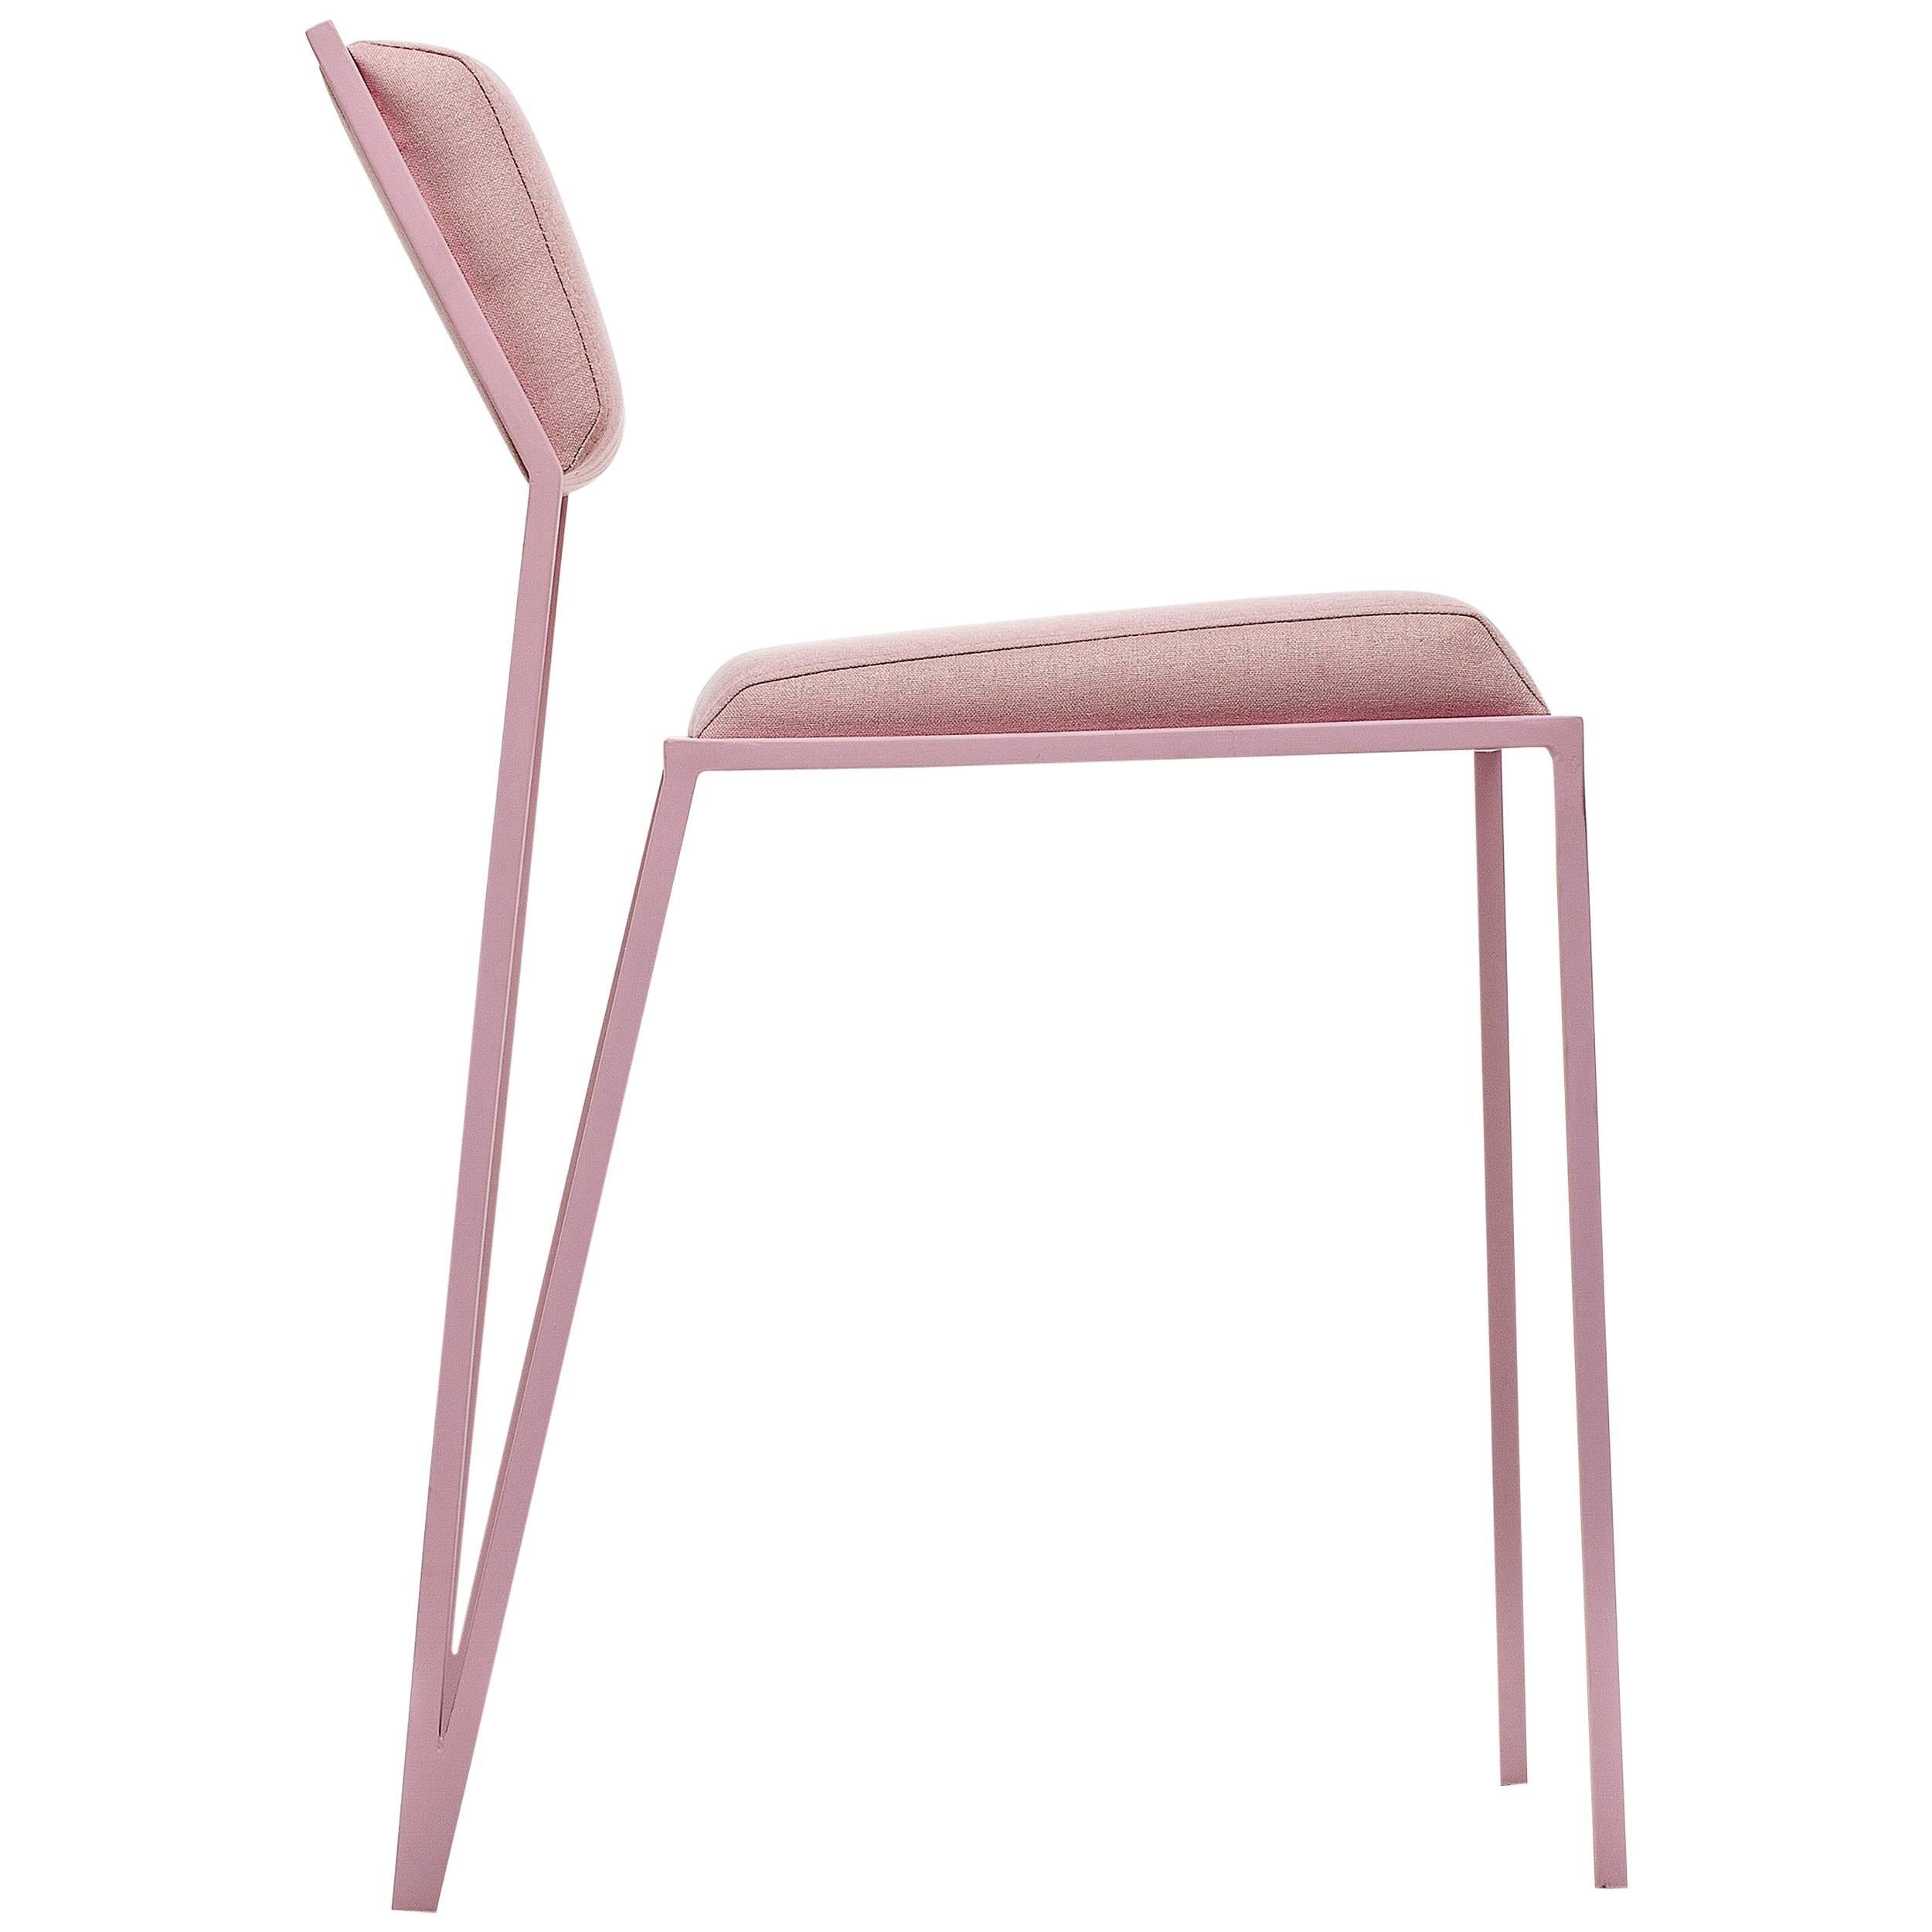 The 'Velvet' minimalist chair was designed from clean and pure lines with the elimination of any kind of excesses so that your greater identity were the colors, in a range of 09 options chosen by the user. By its minimalist appearance, the color of